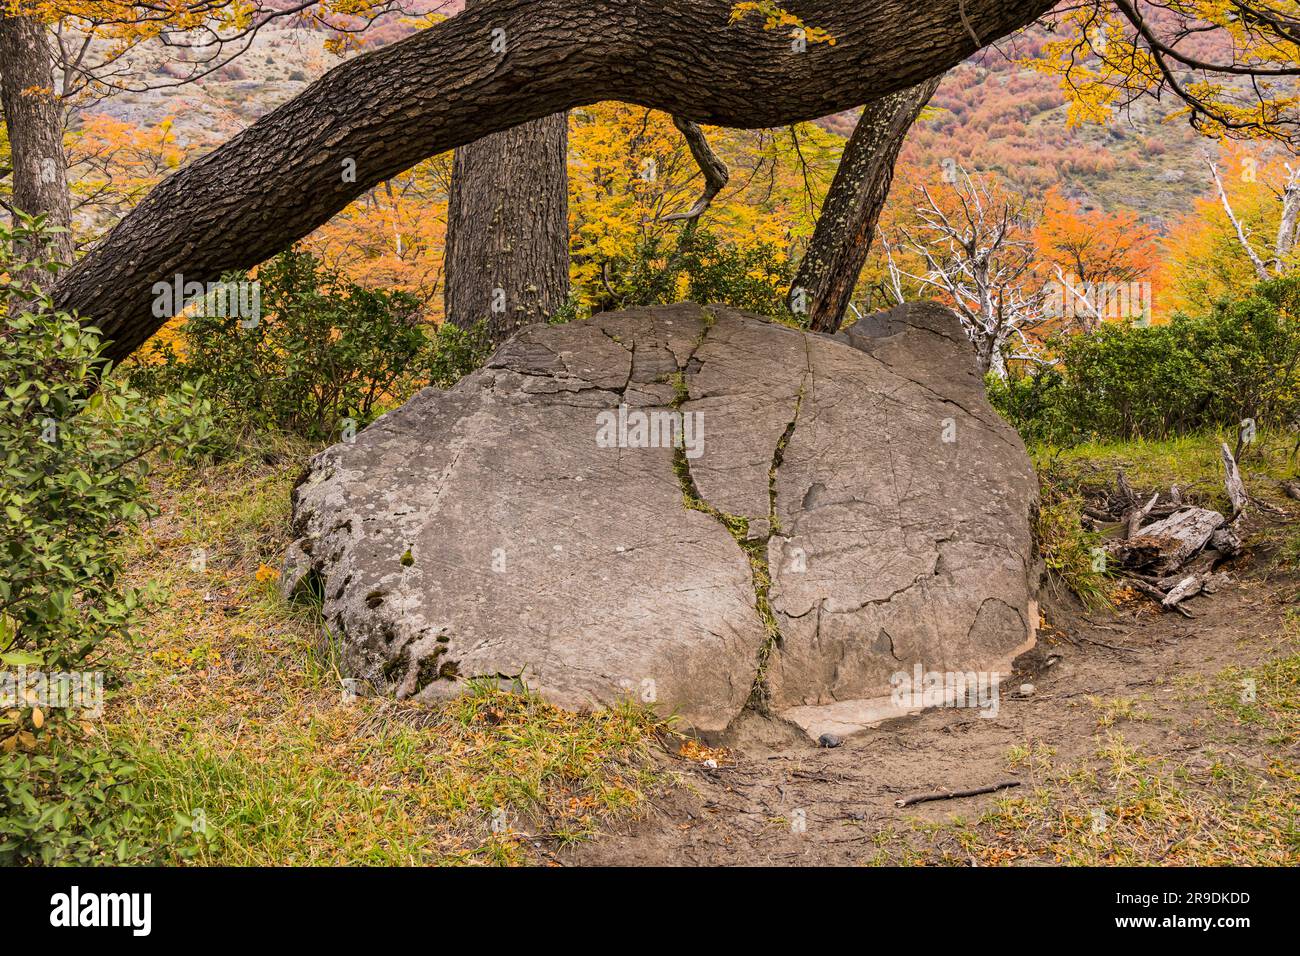 A prominent rock under an autumn colored tree on a path in Torres del Paine National Park near Grey Glacier, Chile, Patagonia, South America Stock Photo